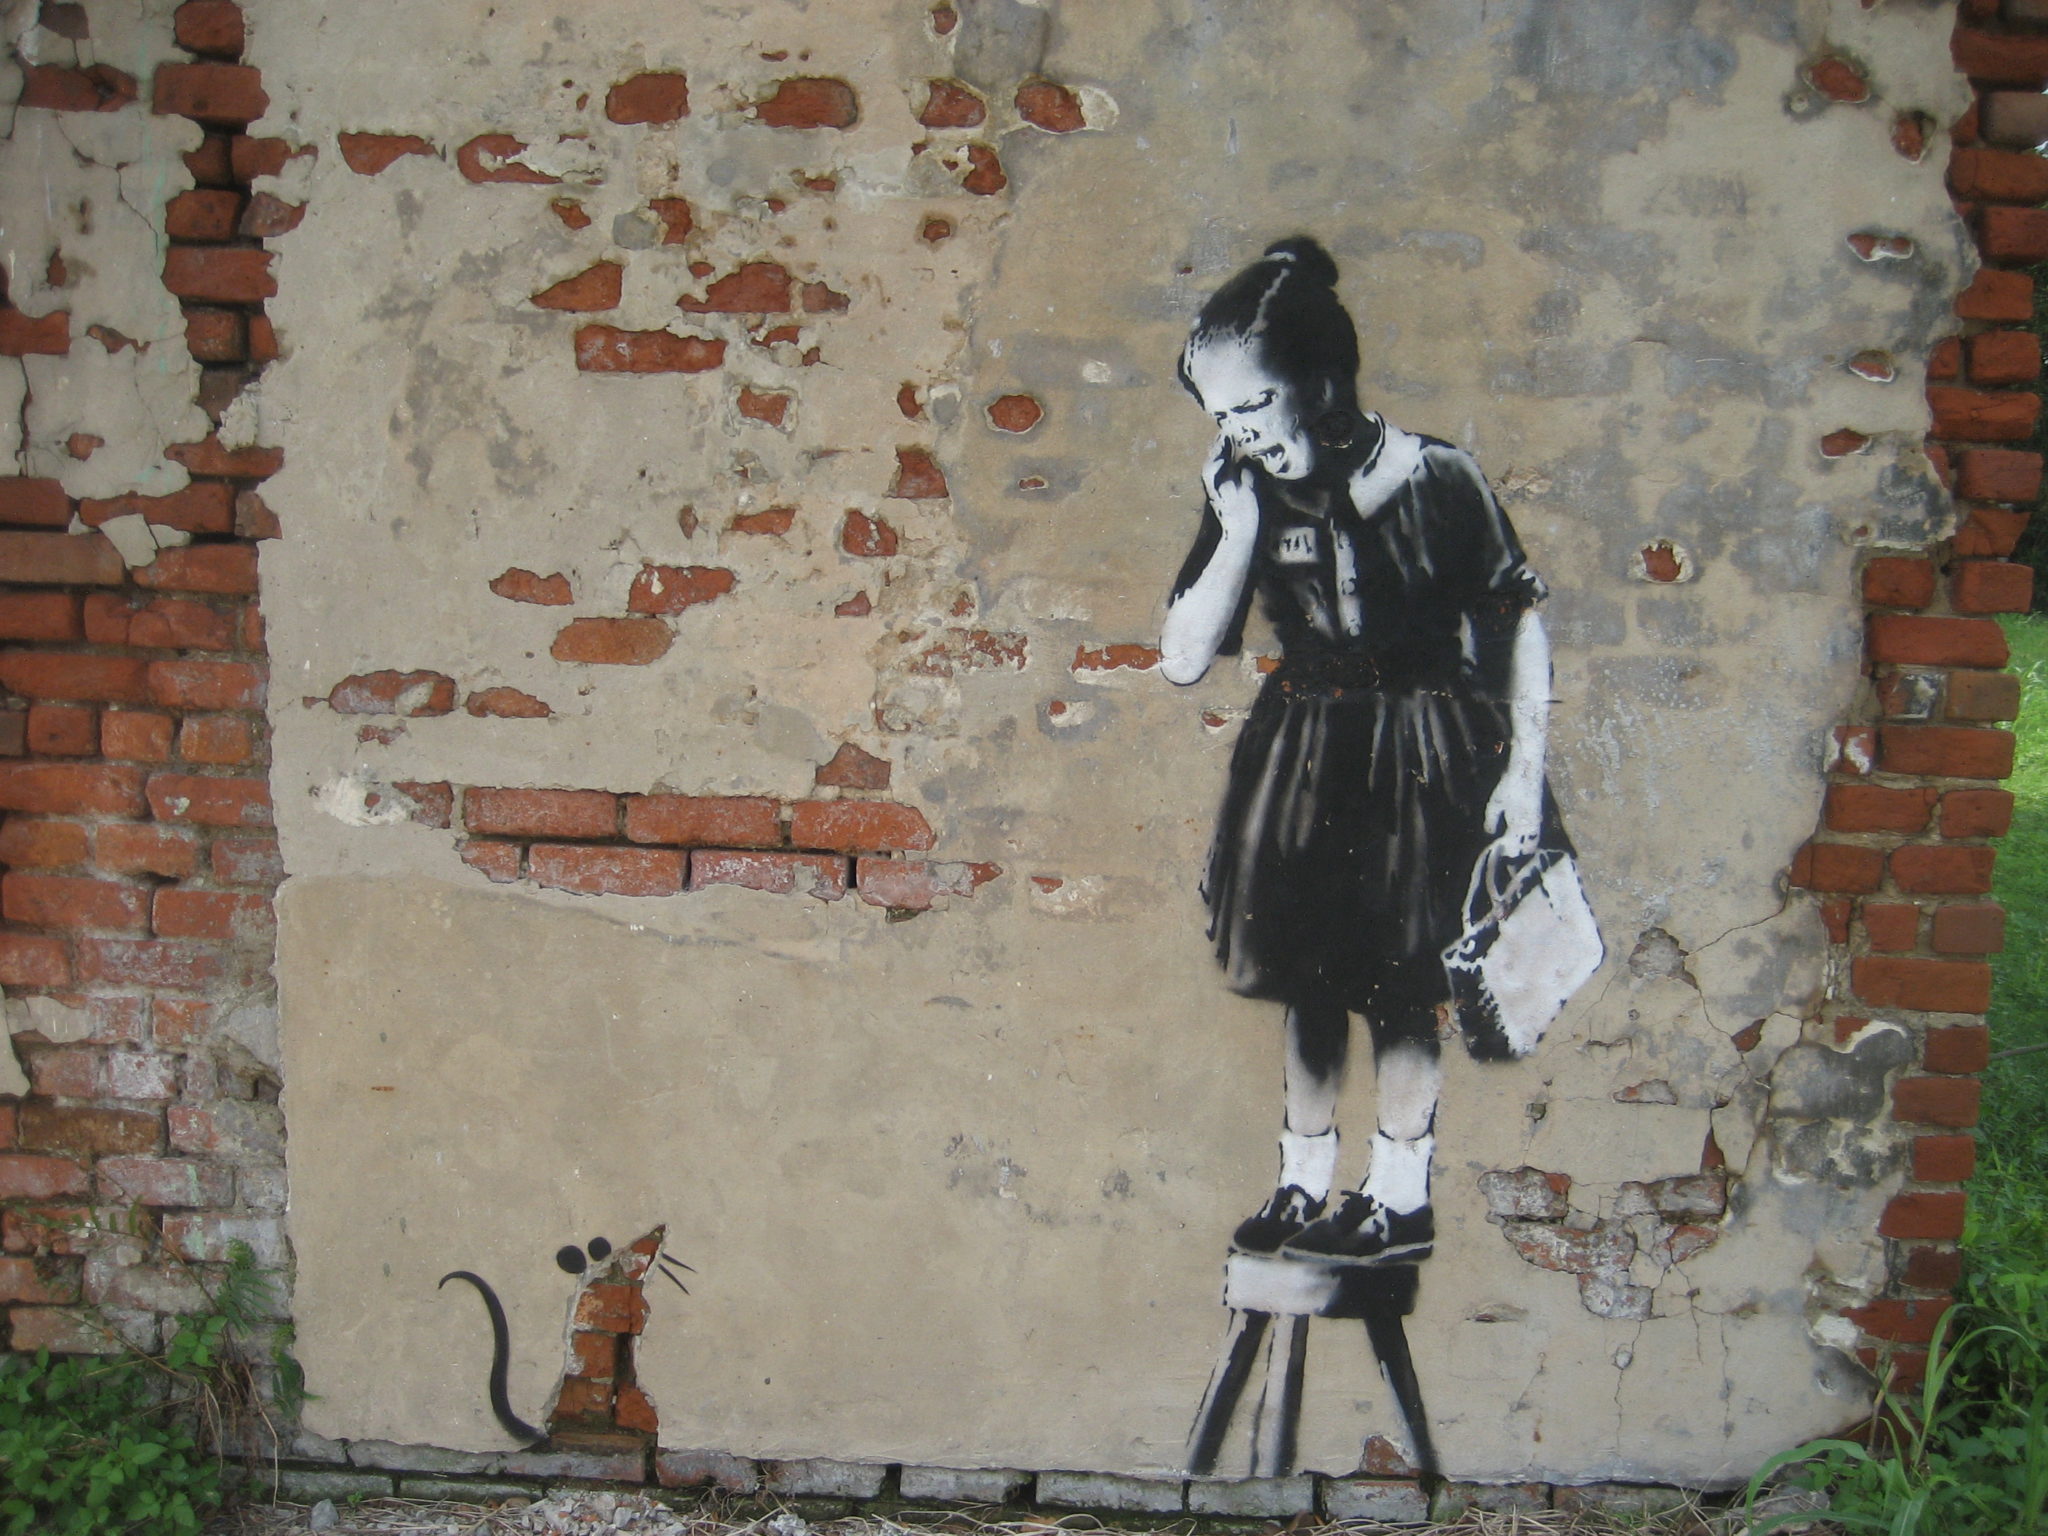 banksy ratgirl - one of his most expensive art works